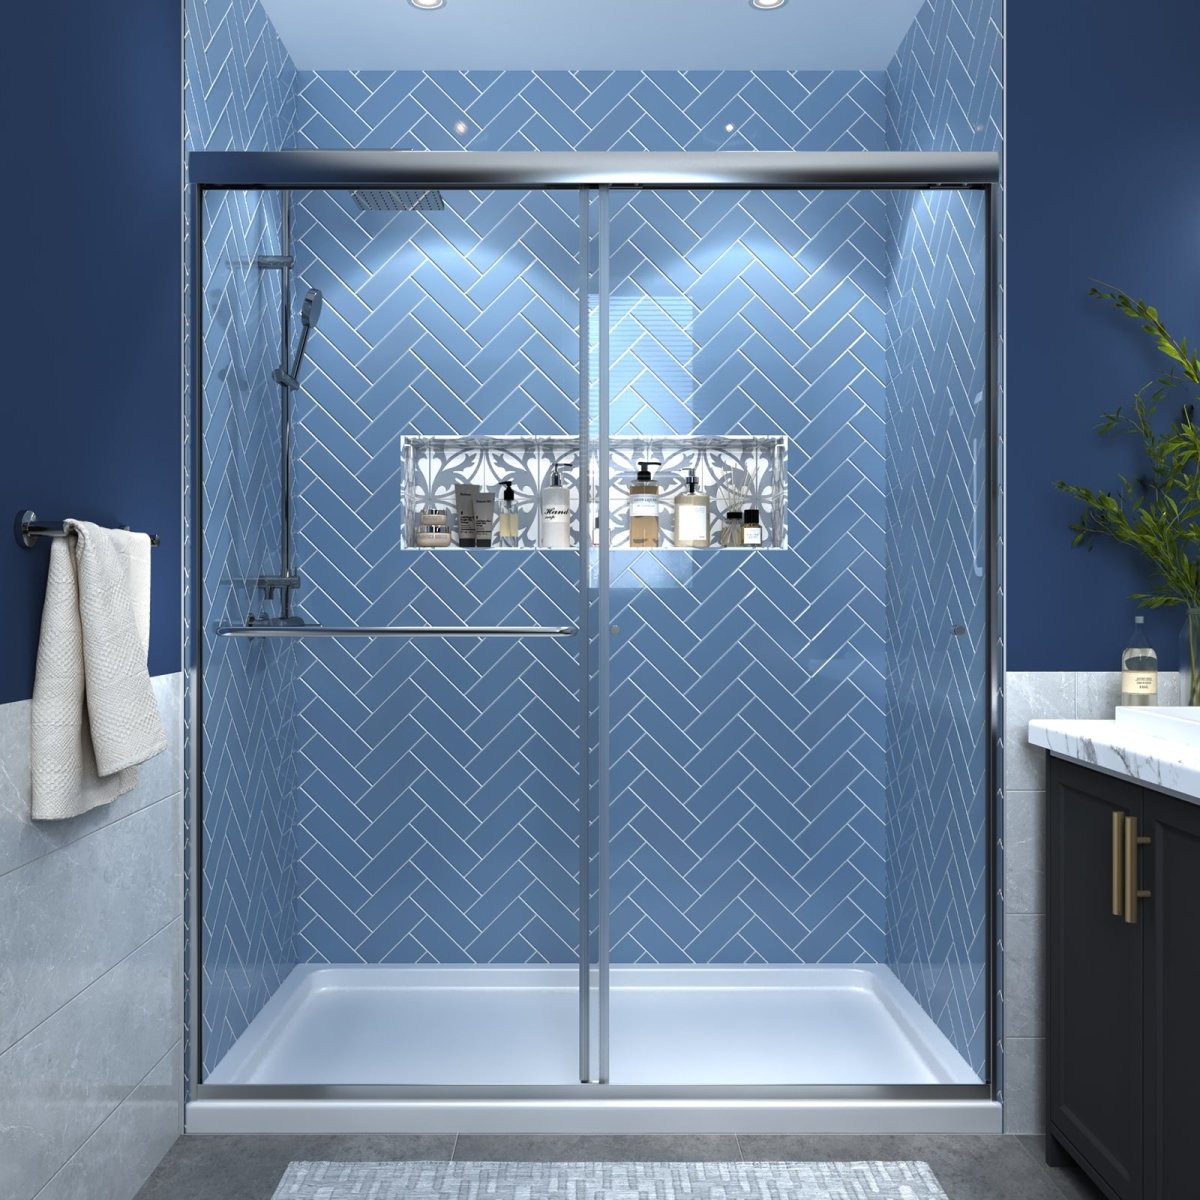 ExBrite 60 in. W x 70 in. H Sliding Framed Shower Door in Chrome Finish with Clear Glass - ExBriteUSA